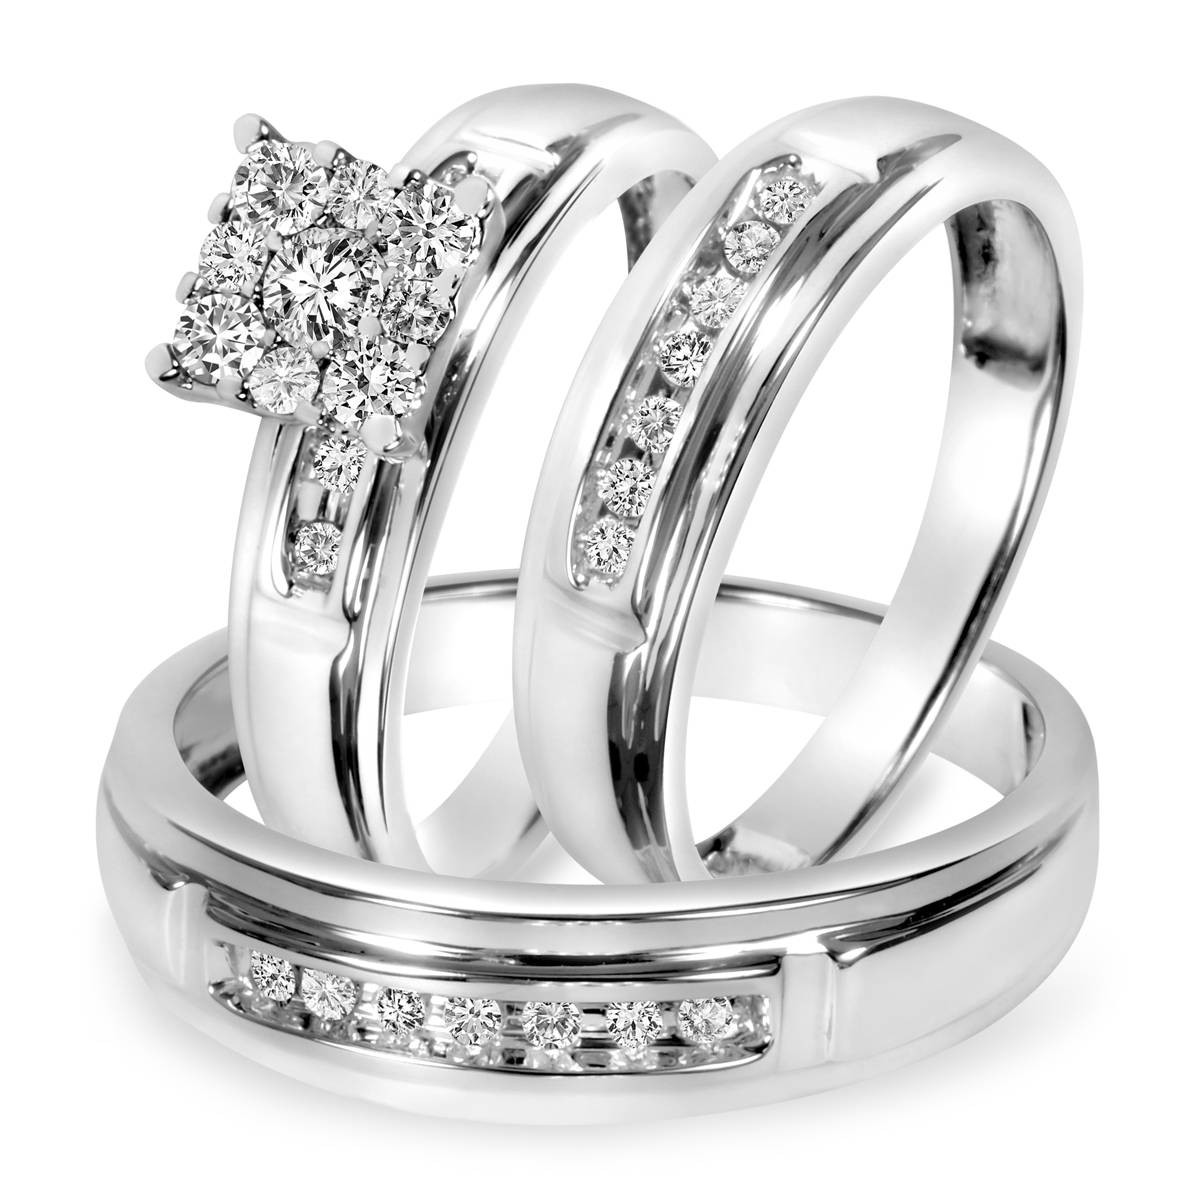 Wedding Ring Sets For Her And Him
 15 Inspirations of Cheap Wedding Bands Sets His And Hers